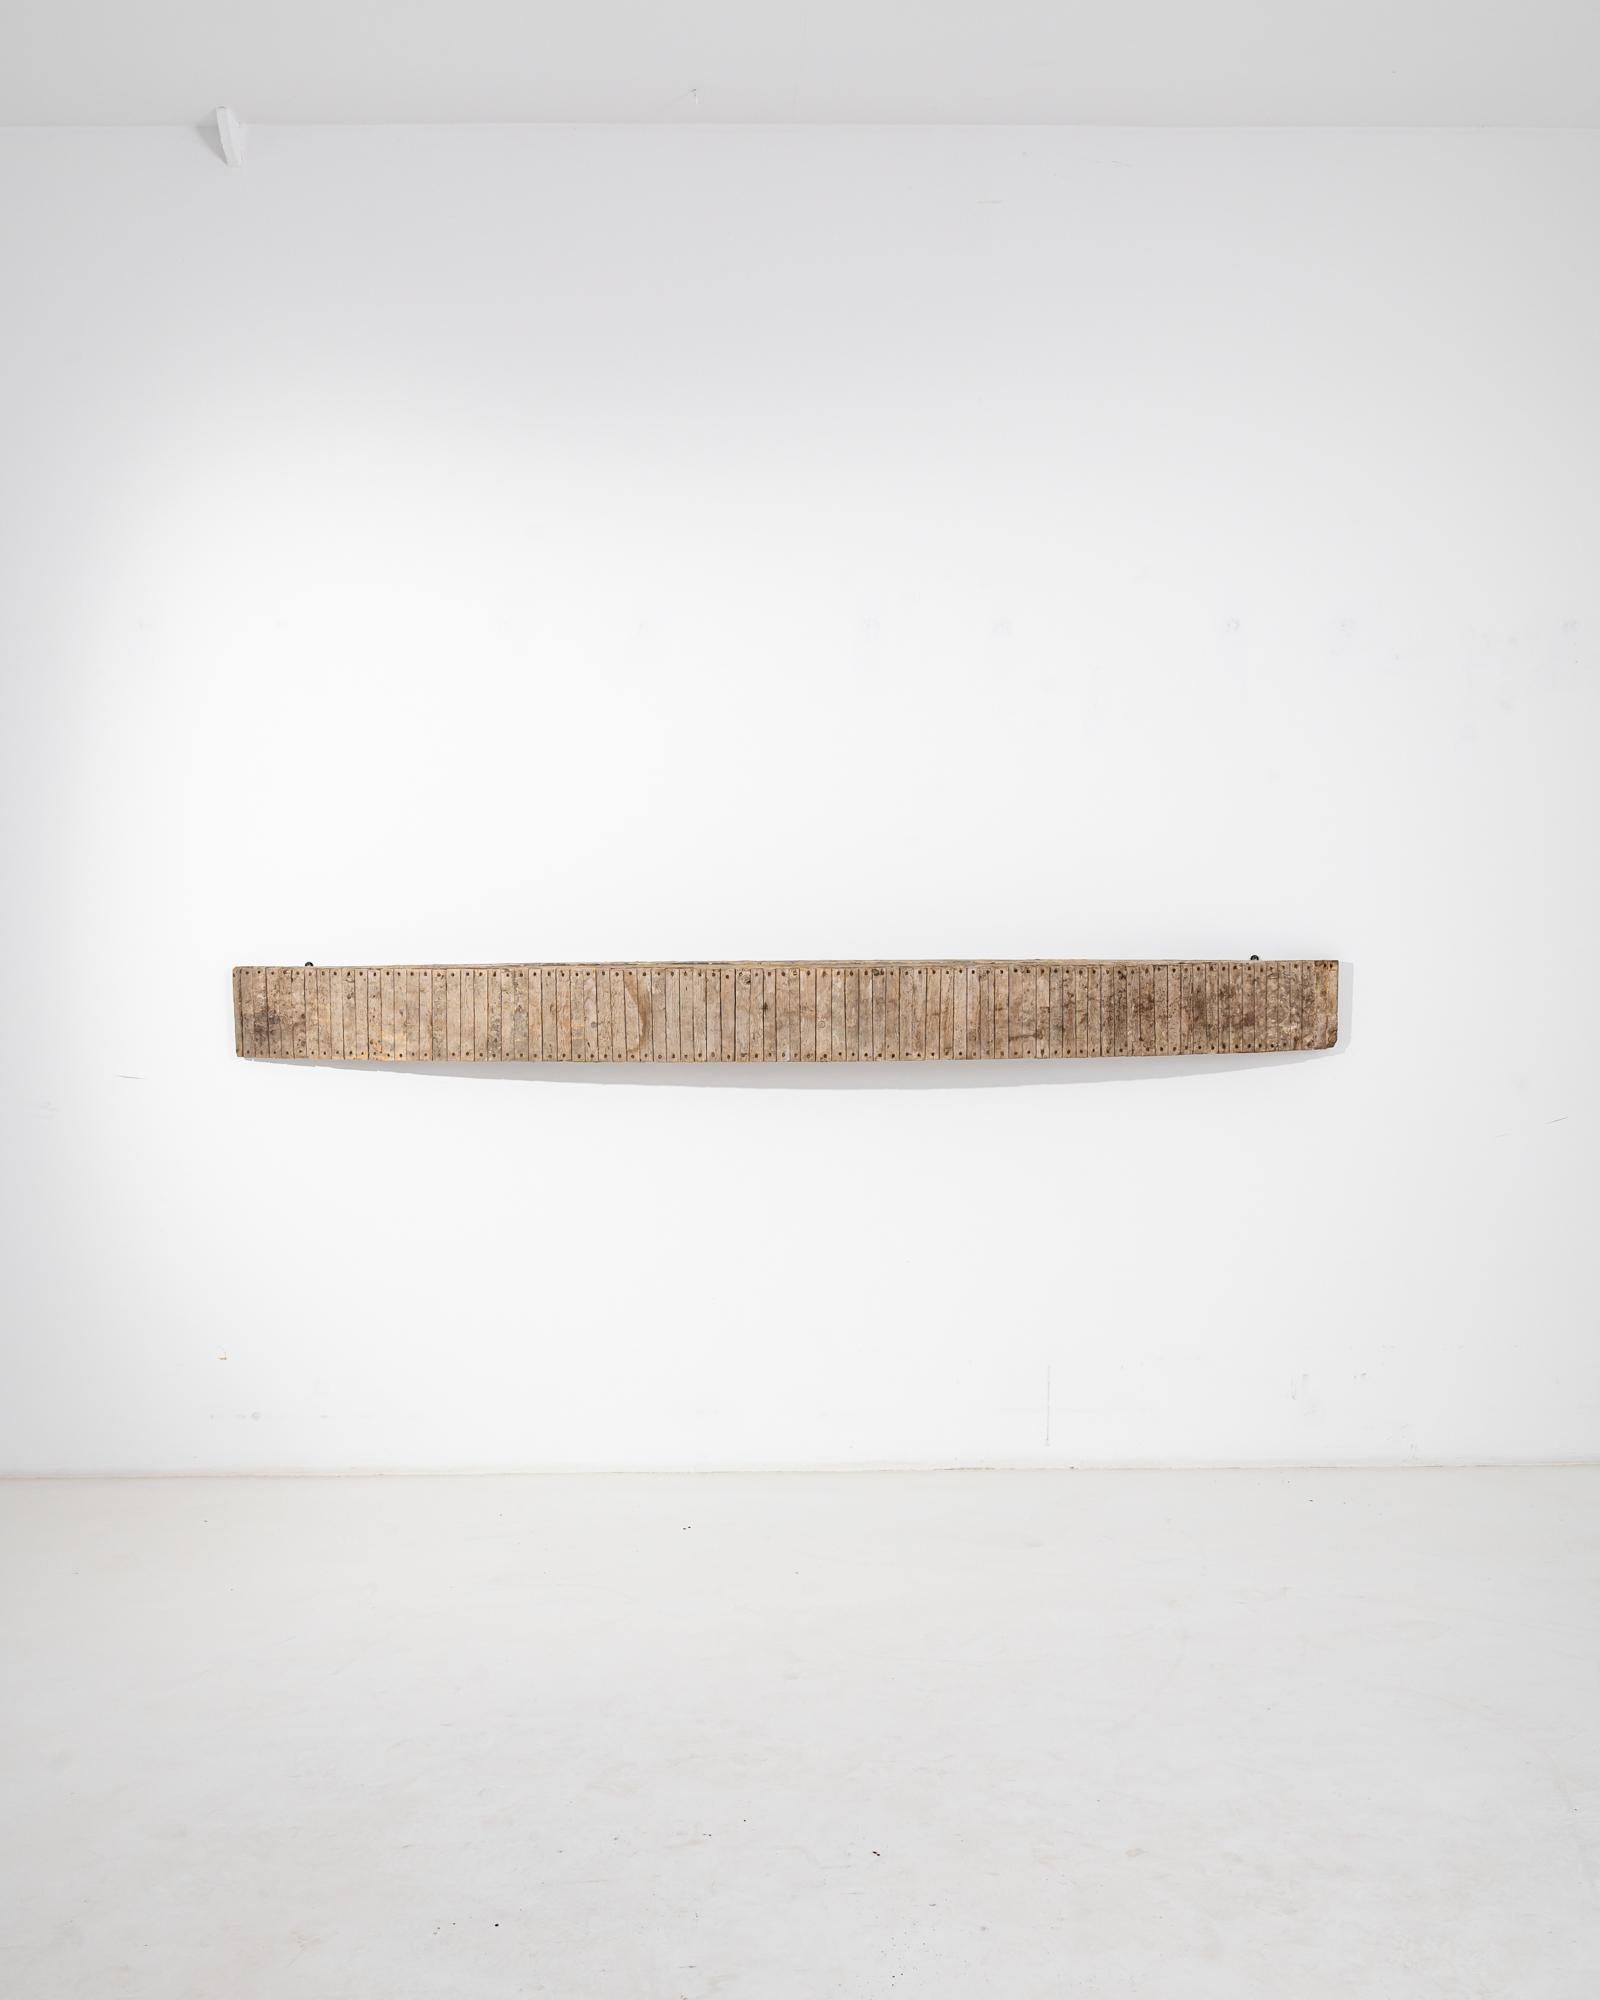 The unique design of this vintage wooden wall console merges a clean minimalist shape with rustic materials. Made in France in the 20th century, a solid slice of wood protrudes from the wall in a streamlined curve, forming a narrow shelf. The outer